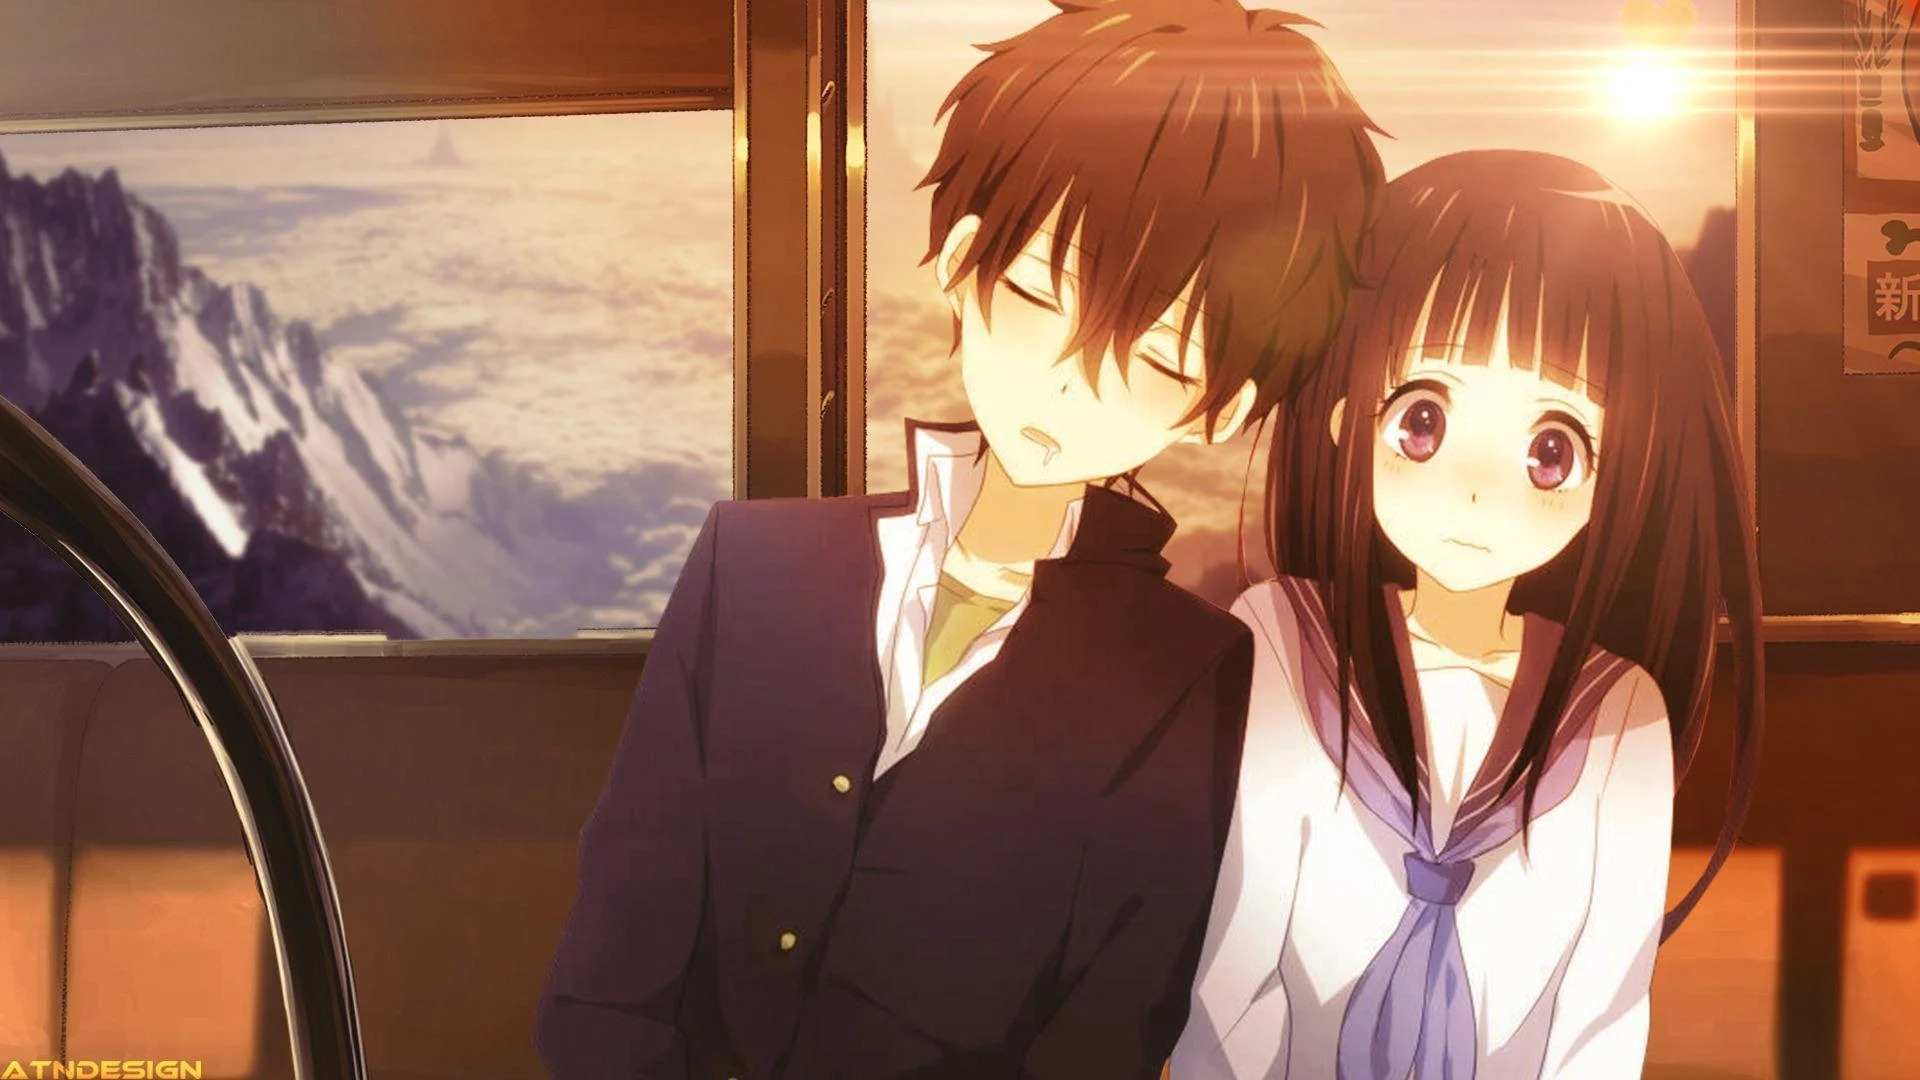 Anime cute couple images